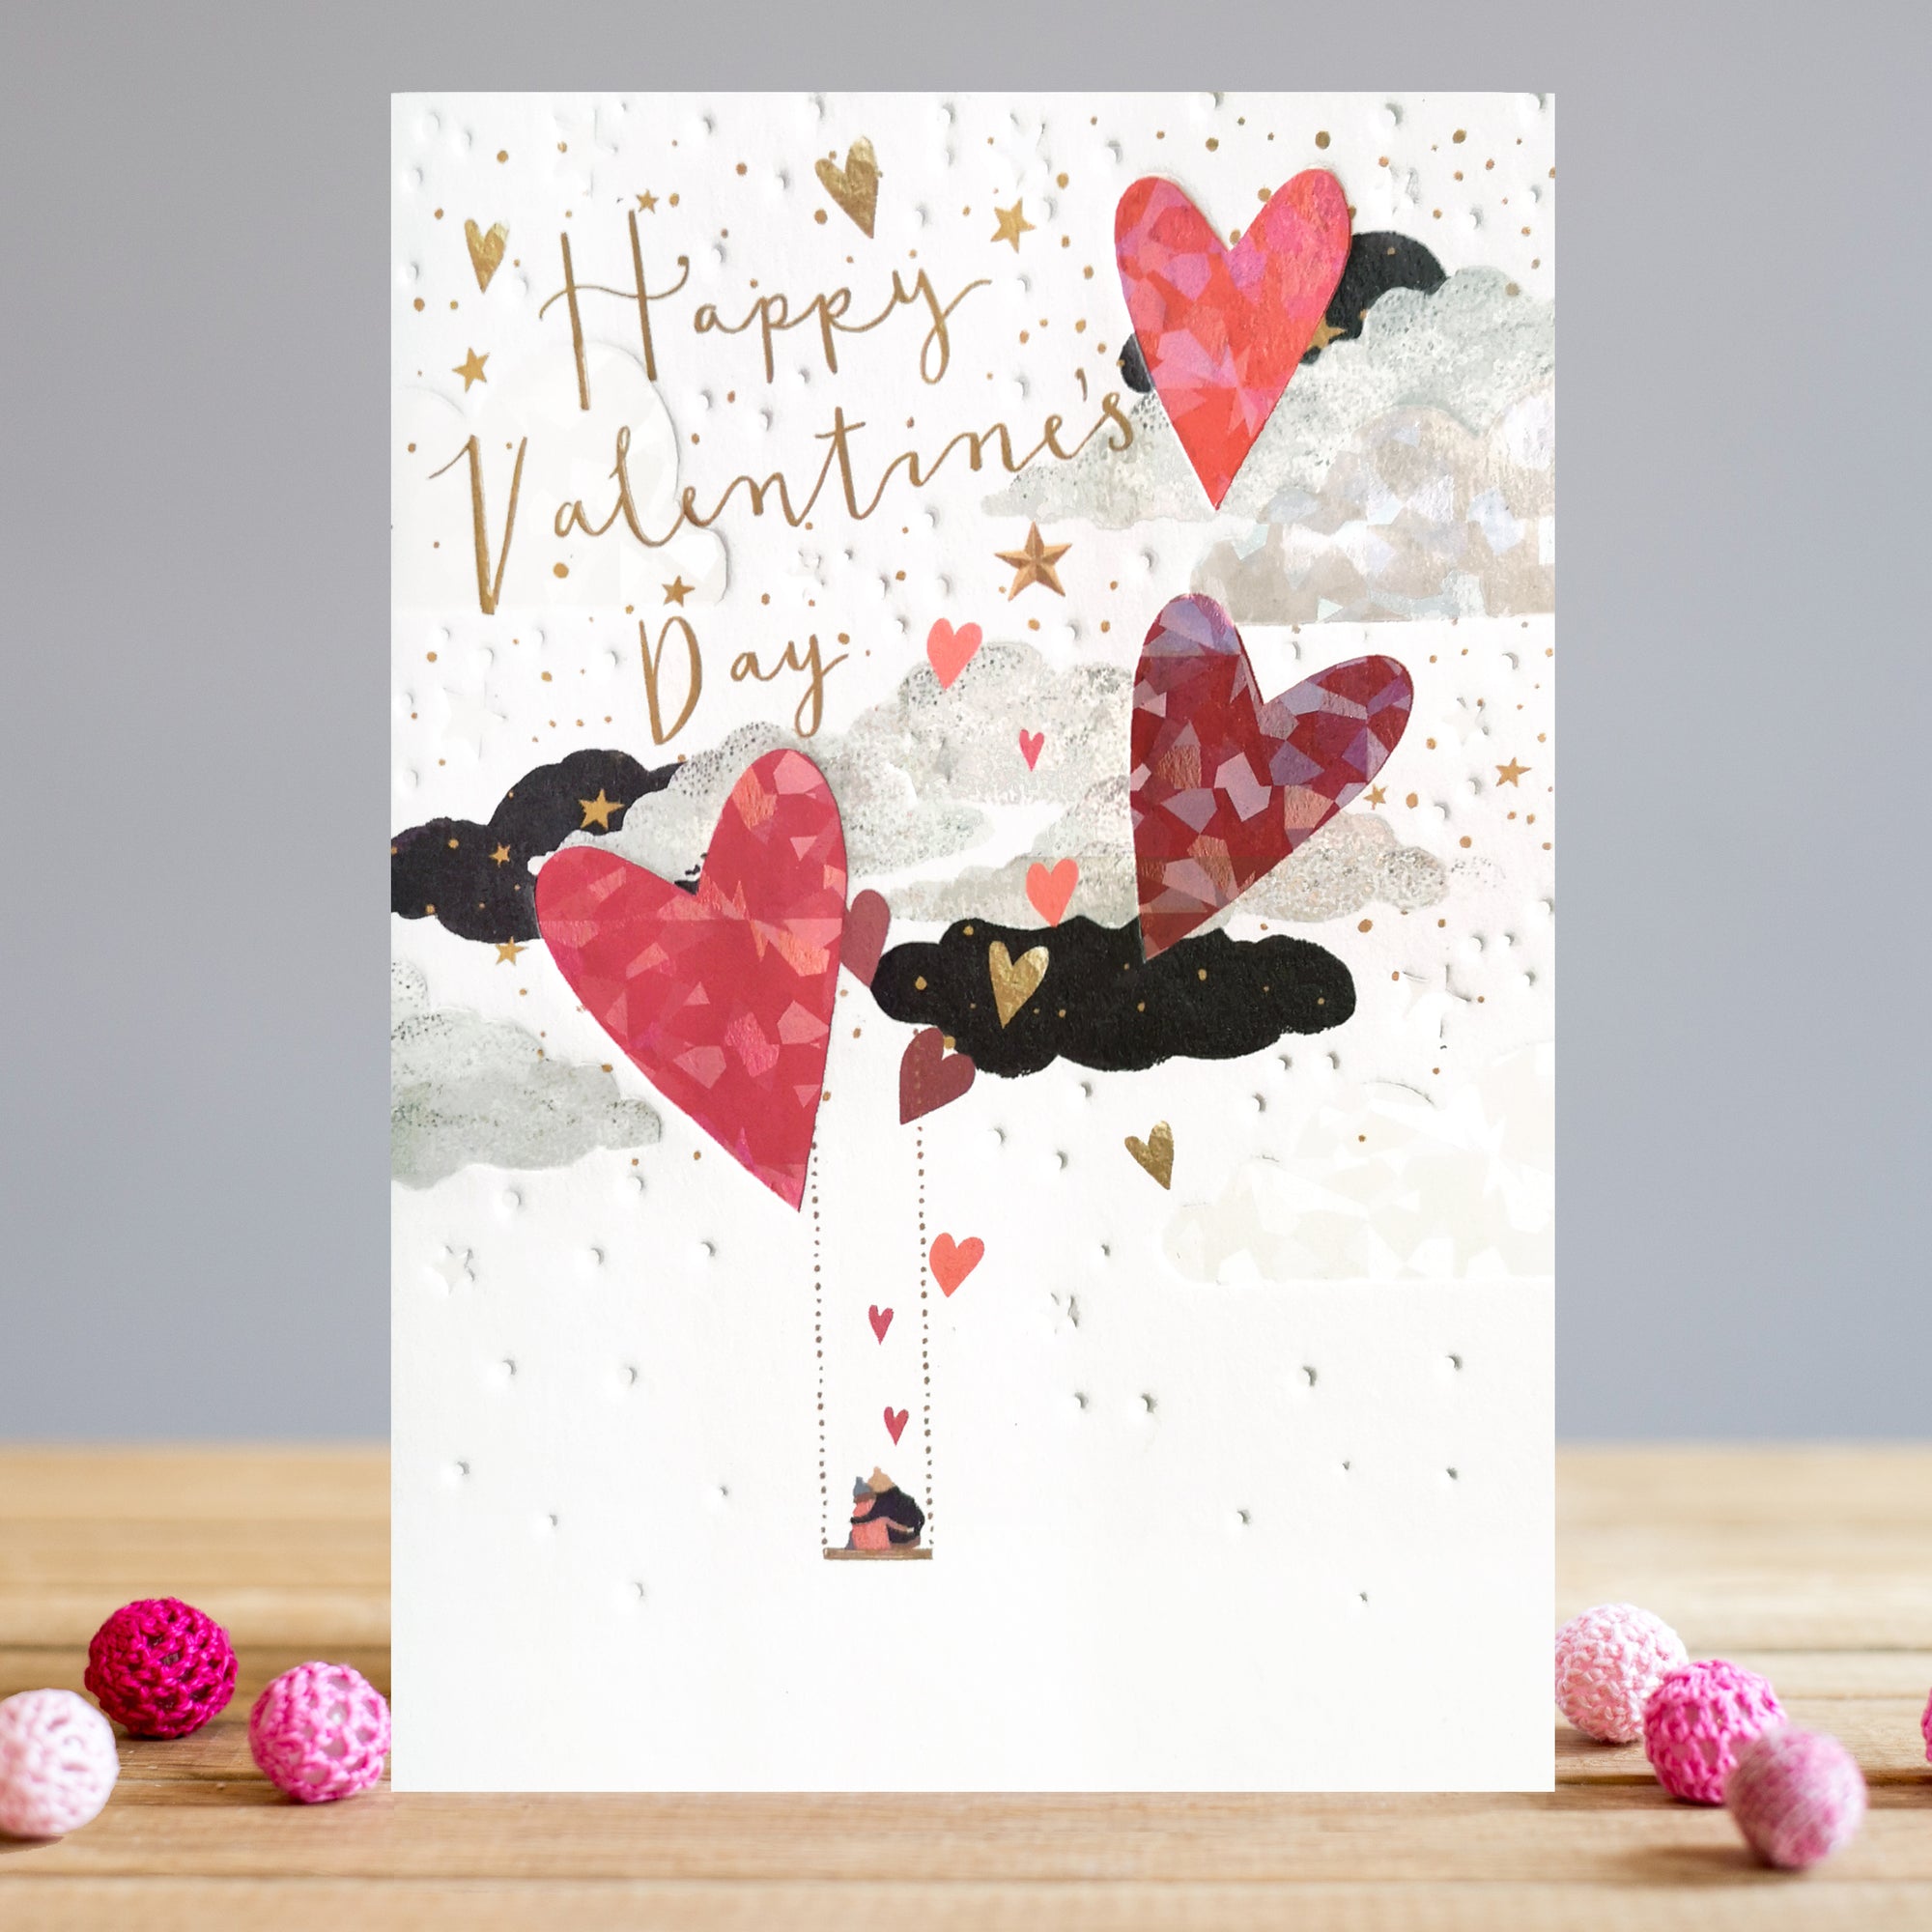 Valentine's Day Hearts Greeting Card